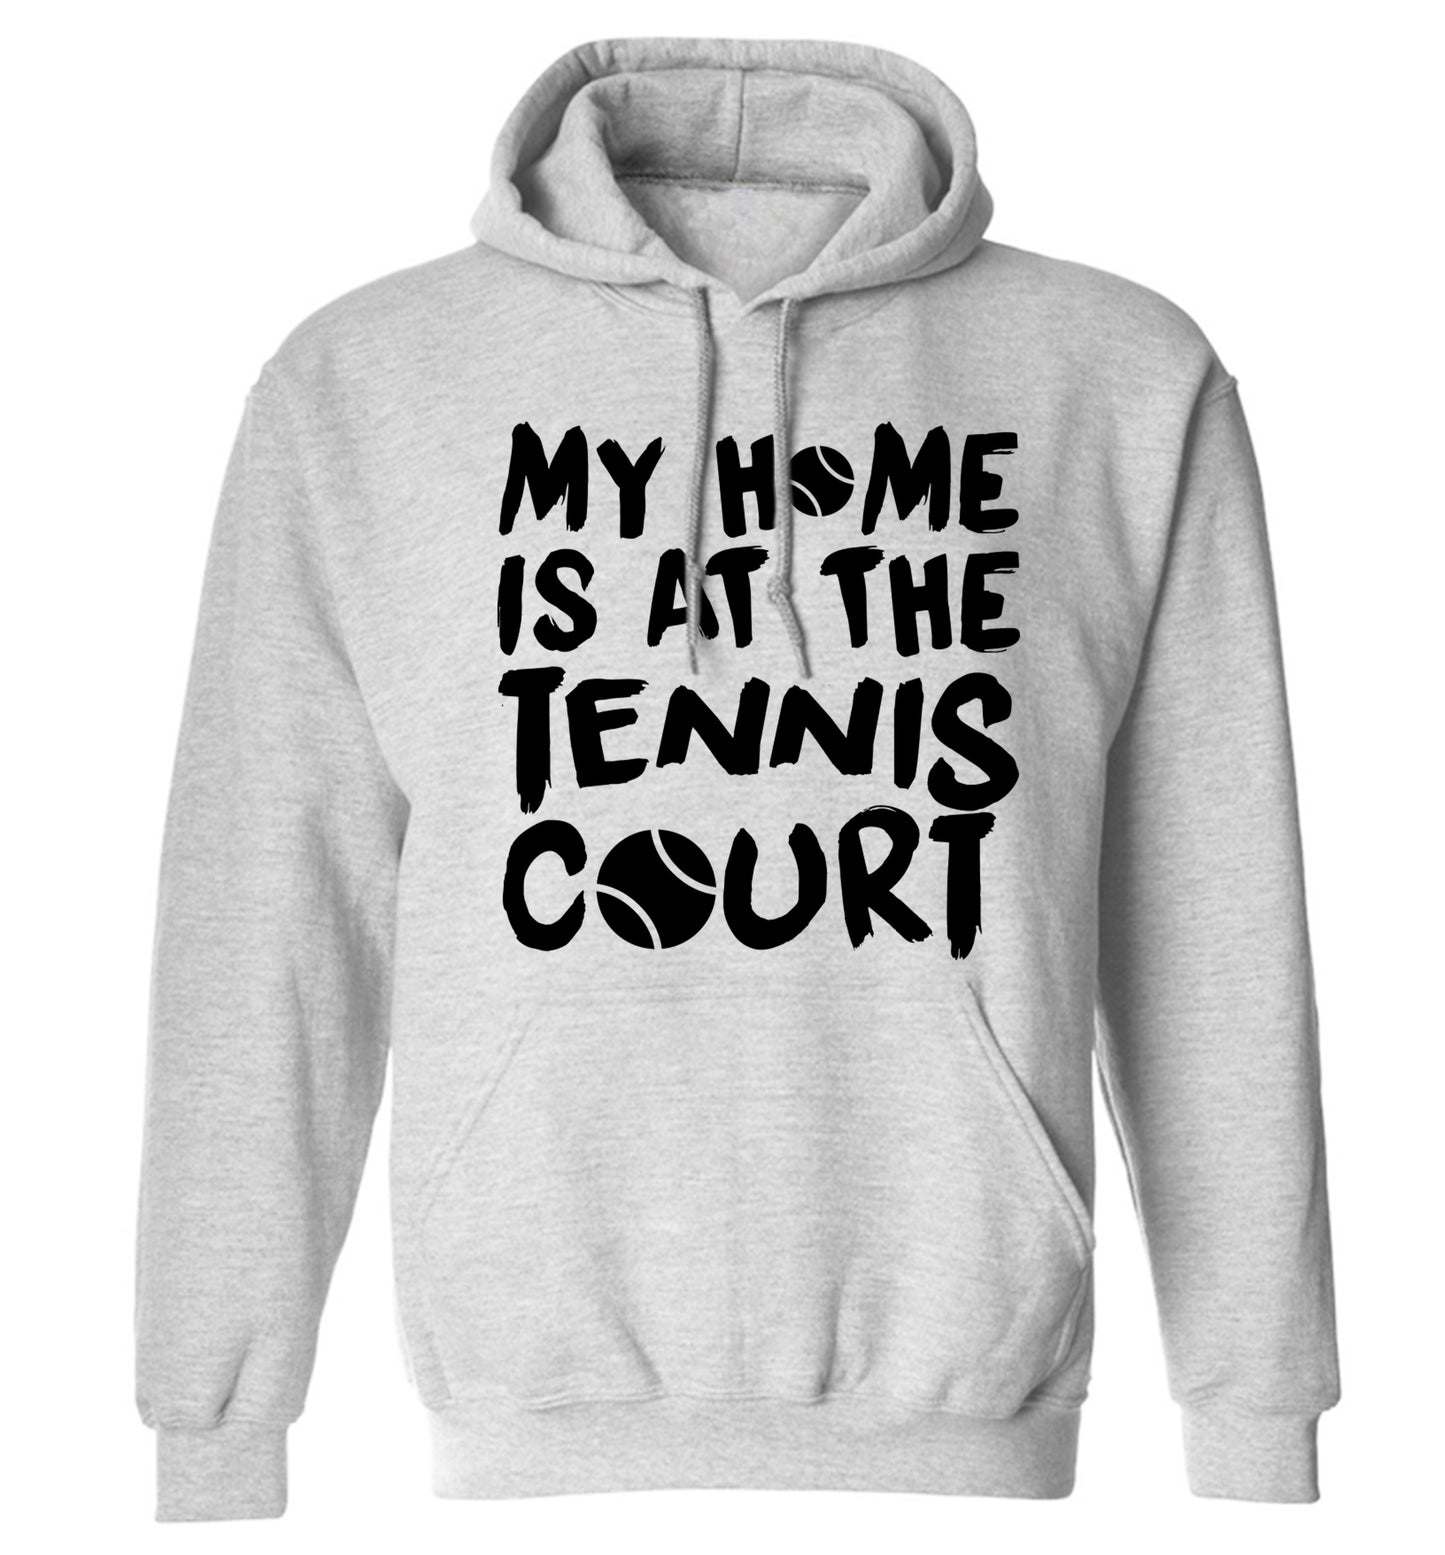 My home is at the tennis court adults unisex grey hoodie 2XL